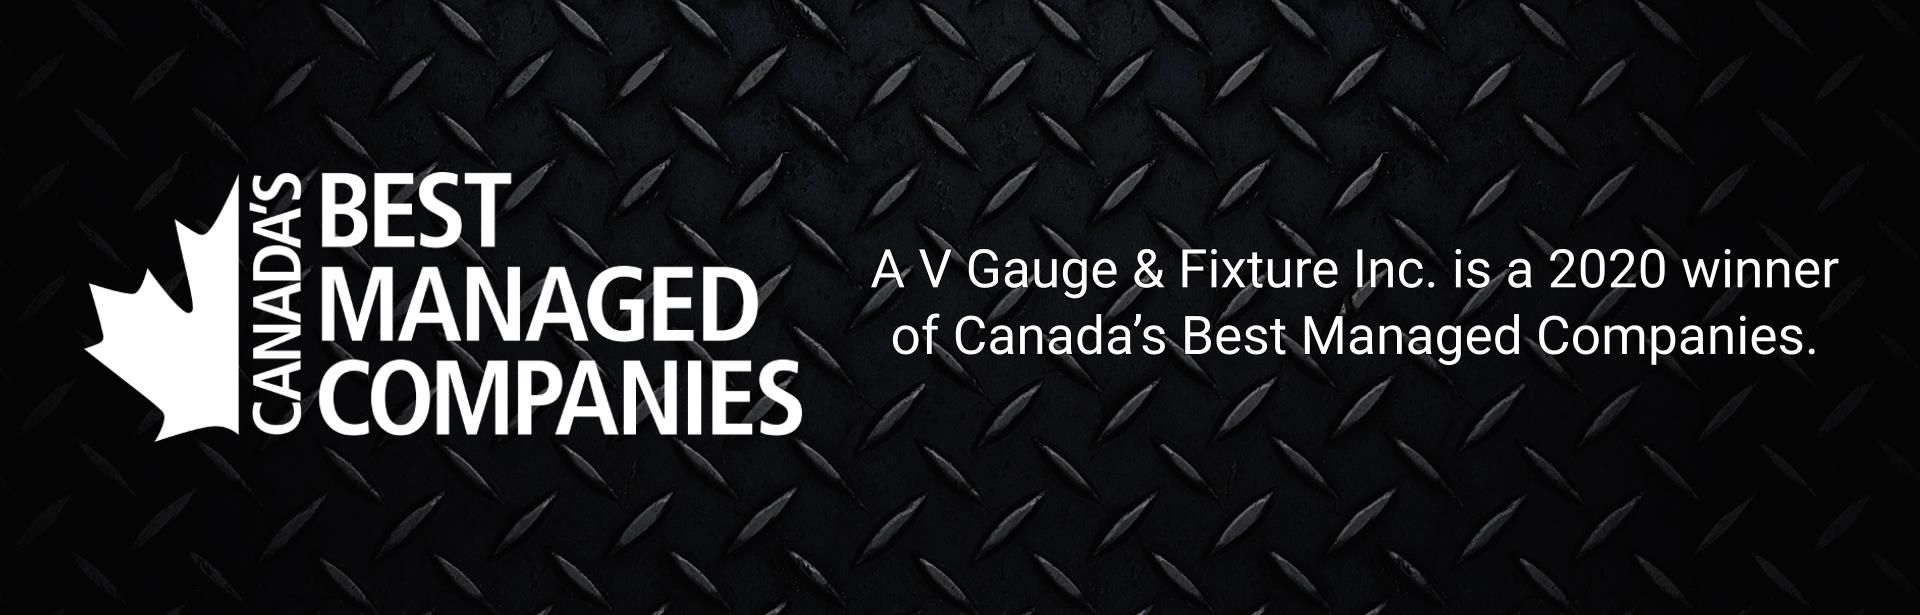 A V Gauge & Fixture Inc. is a 2019 winner of Canada’s Best Managed Companies.